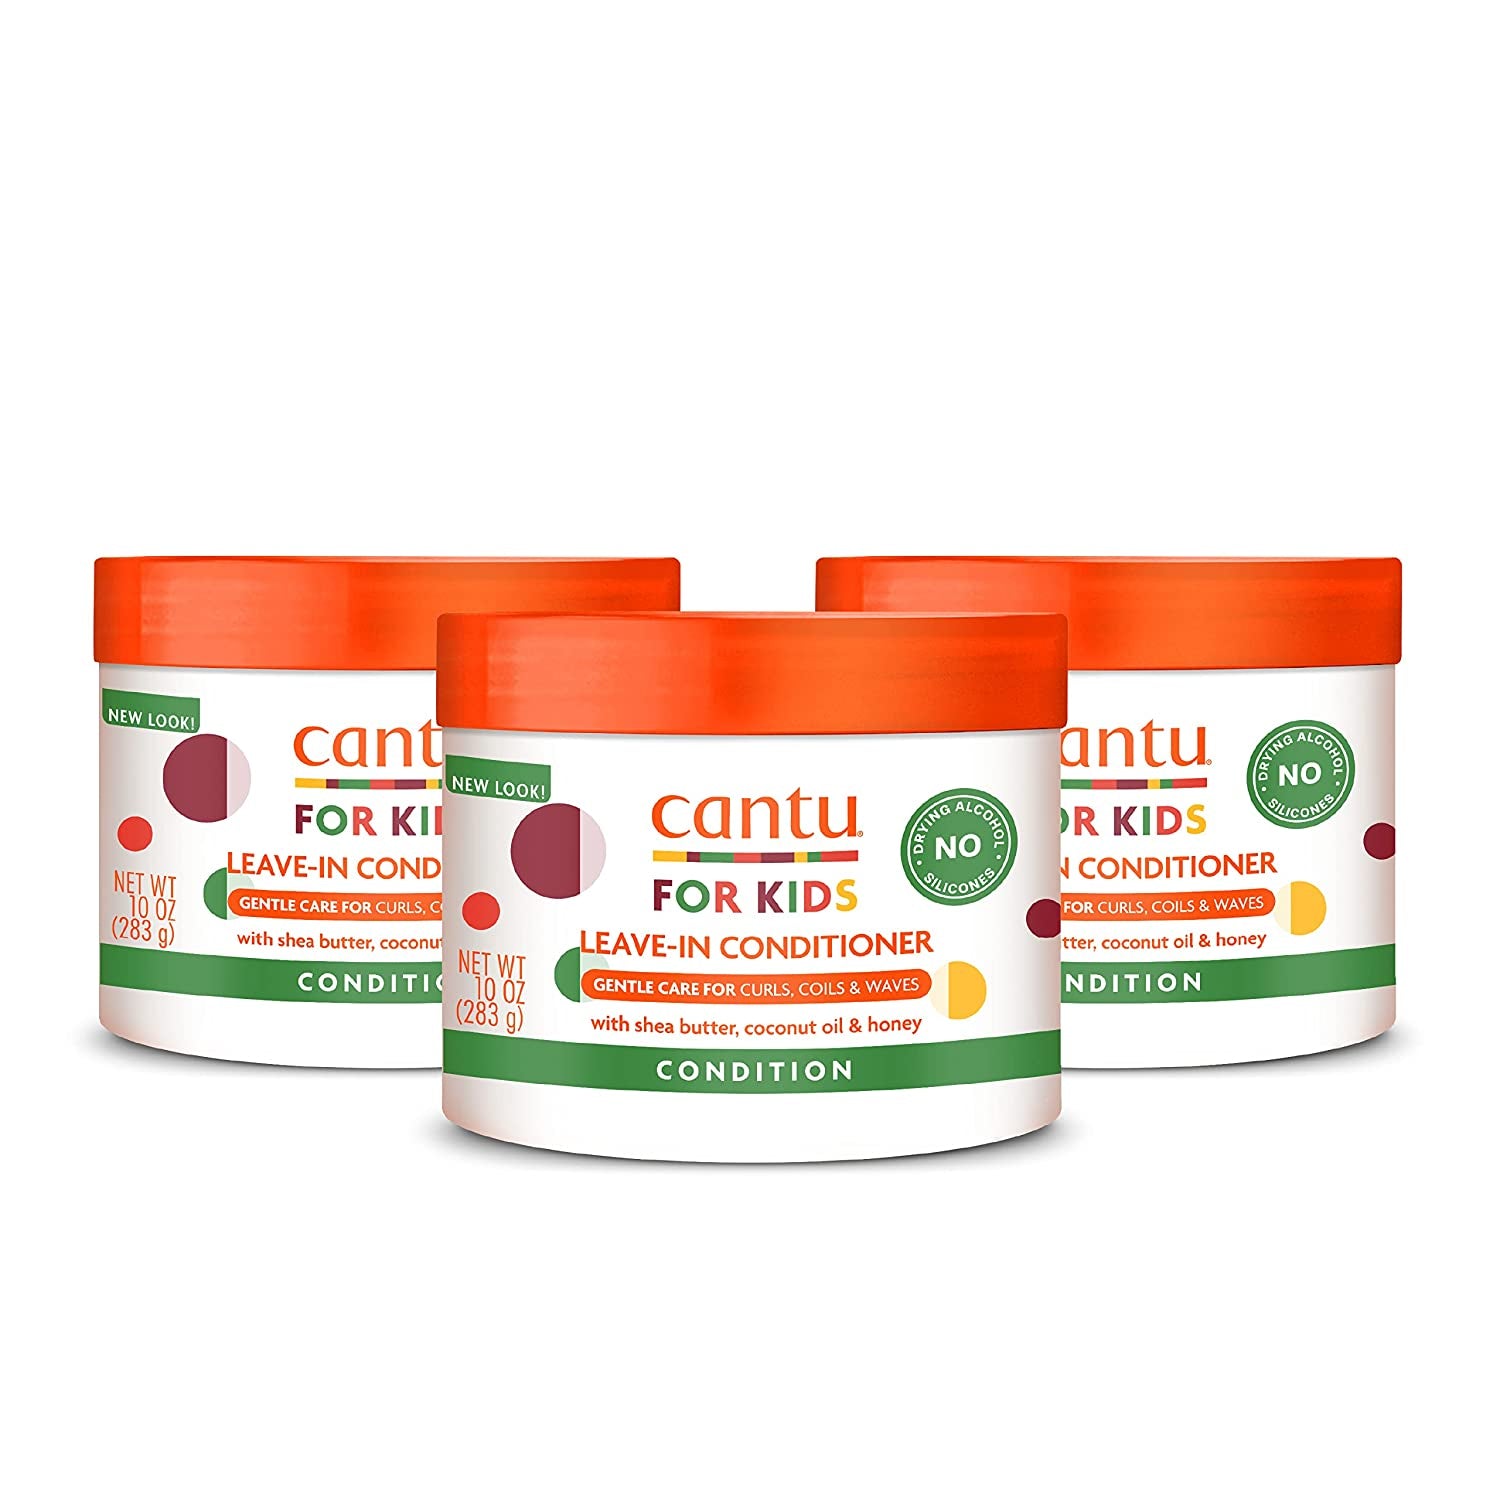 Cantu Care for Kids Leave-In Conditioner, 10 Oz.